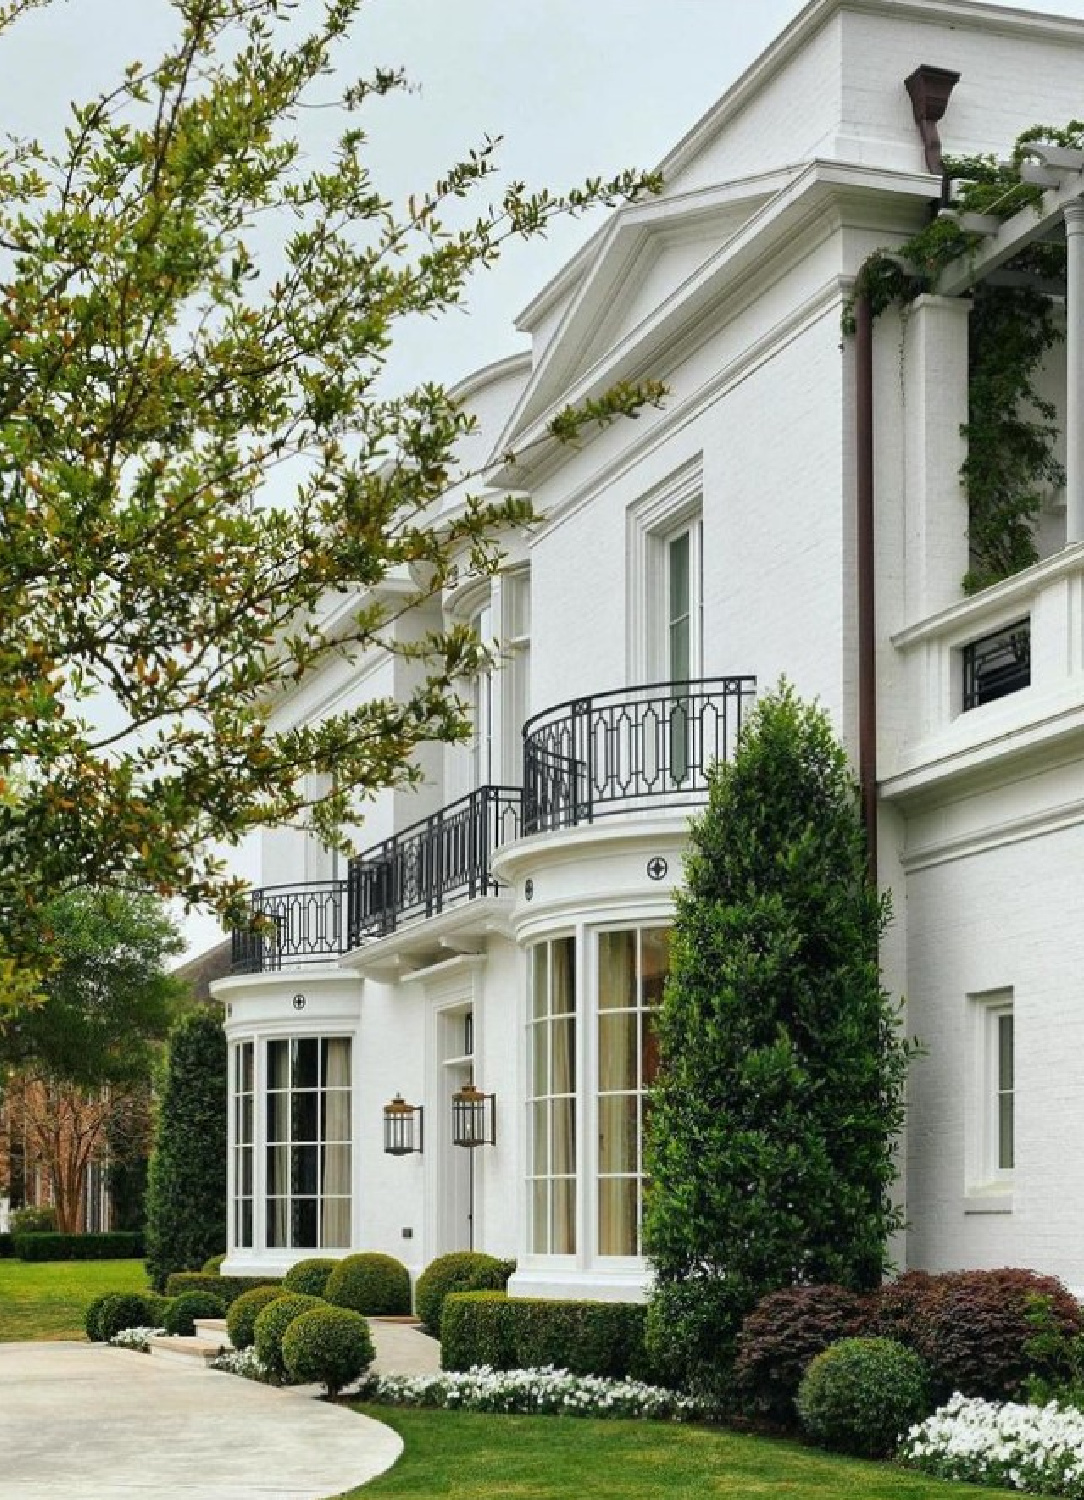 @curtisandwindham - White house exterior with beautiful curved bay windows and balconies. #classicarchitecture #whitehouses #whitehouseexteriors